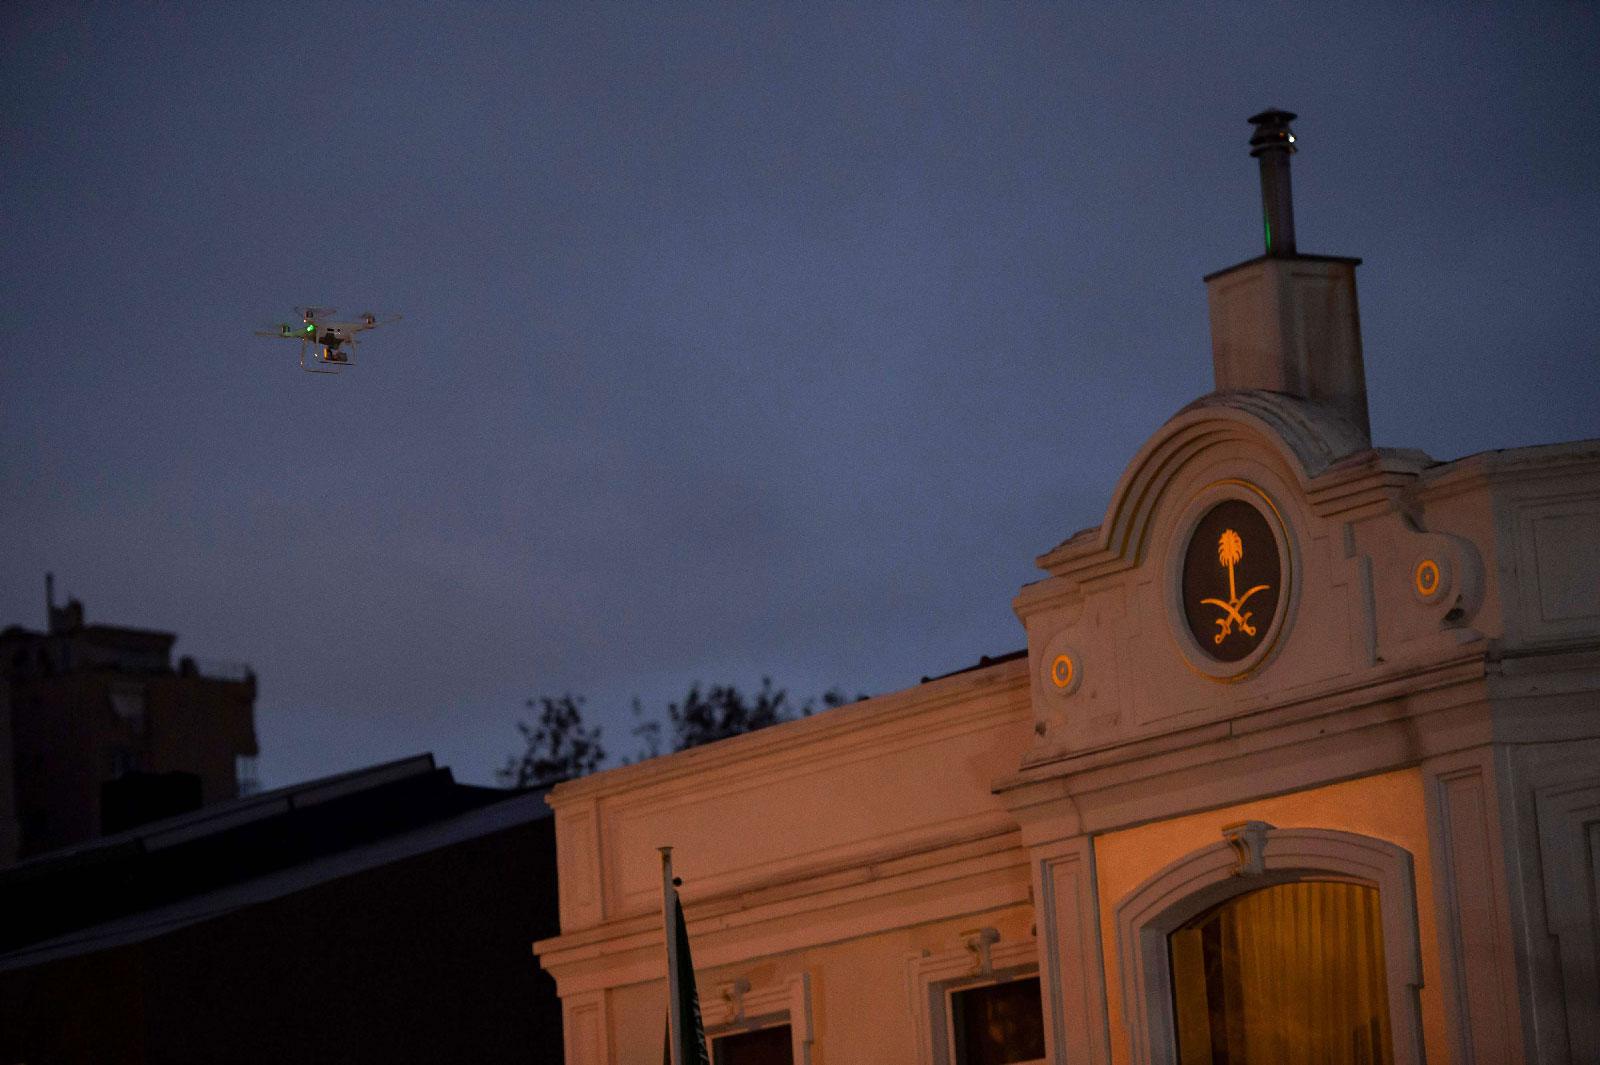 A drone flies over the residence of the Saudi Consul General Mohammad al-Otaibi, on October 17 in Istanbul, Turkey.